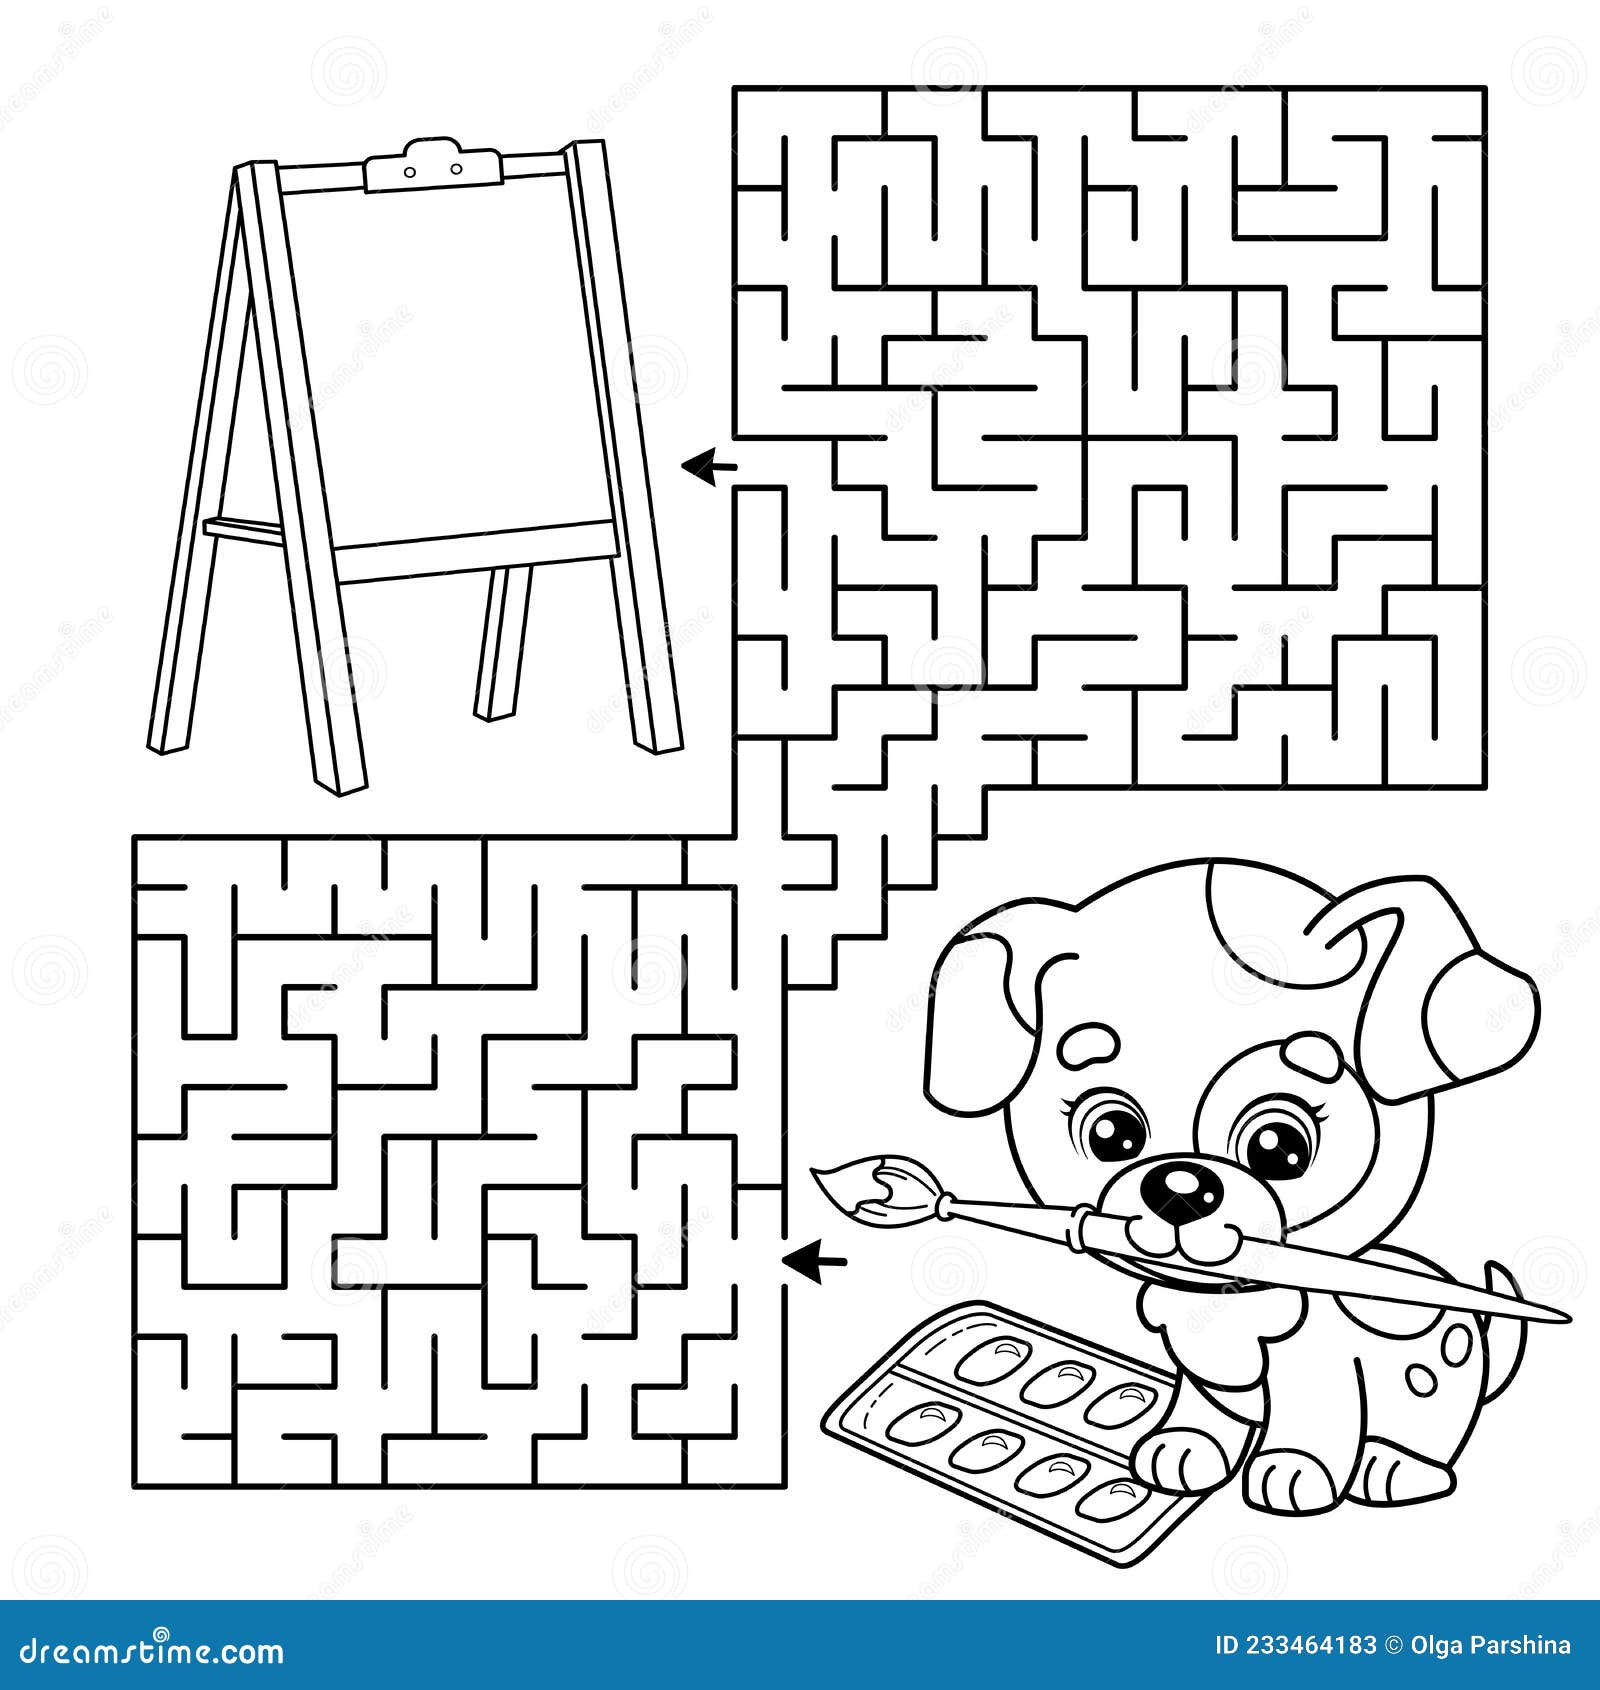 https://thumbs.dreamstime.com/z/maze-labyrinth-game-puzzle-coloring-page-outline-cartoon-little-dog-brush-paints-artist-easel-book-kids-233464183.jpg